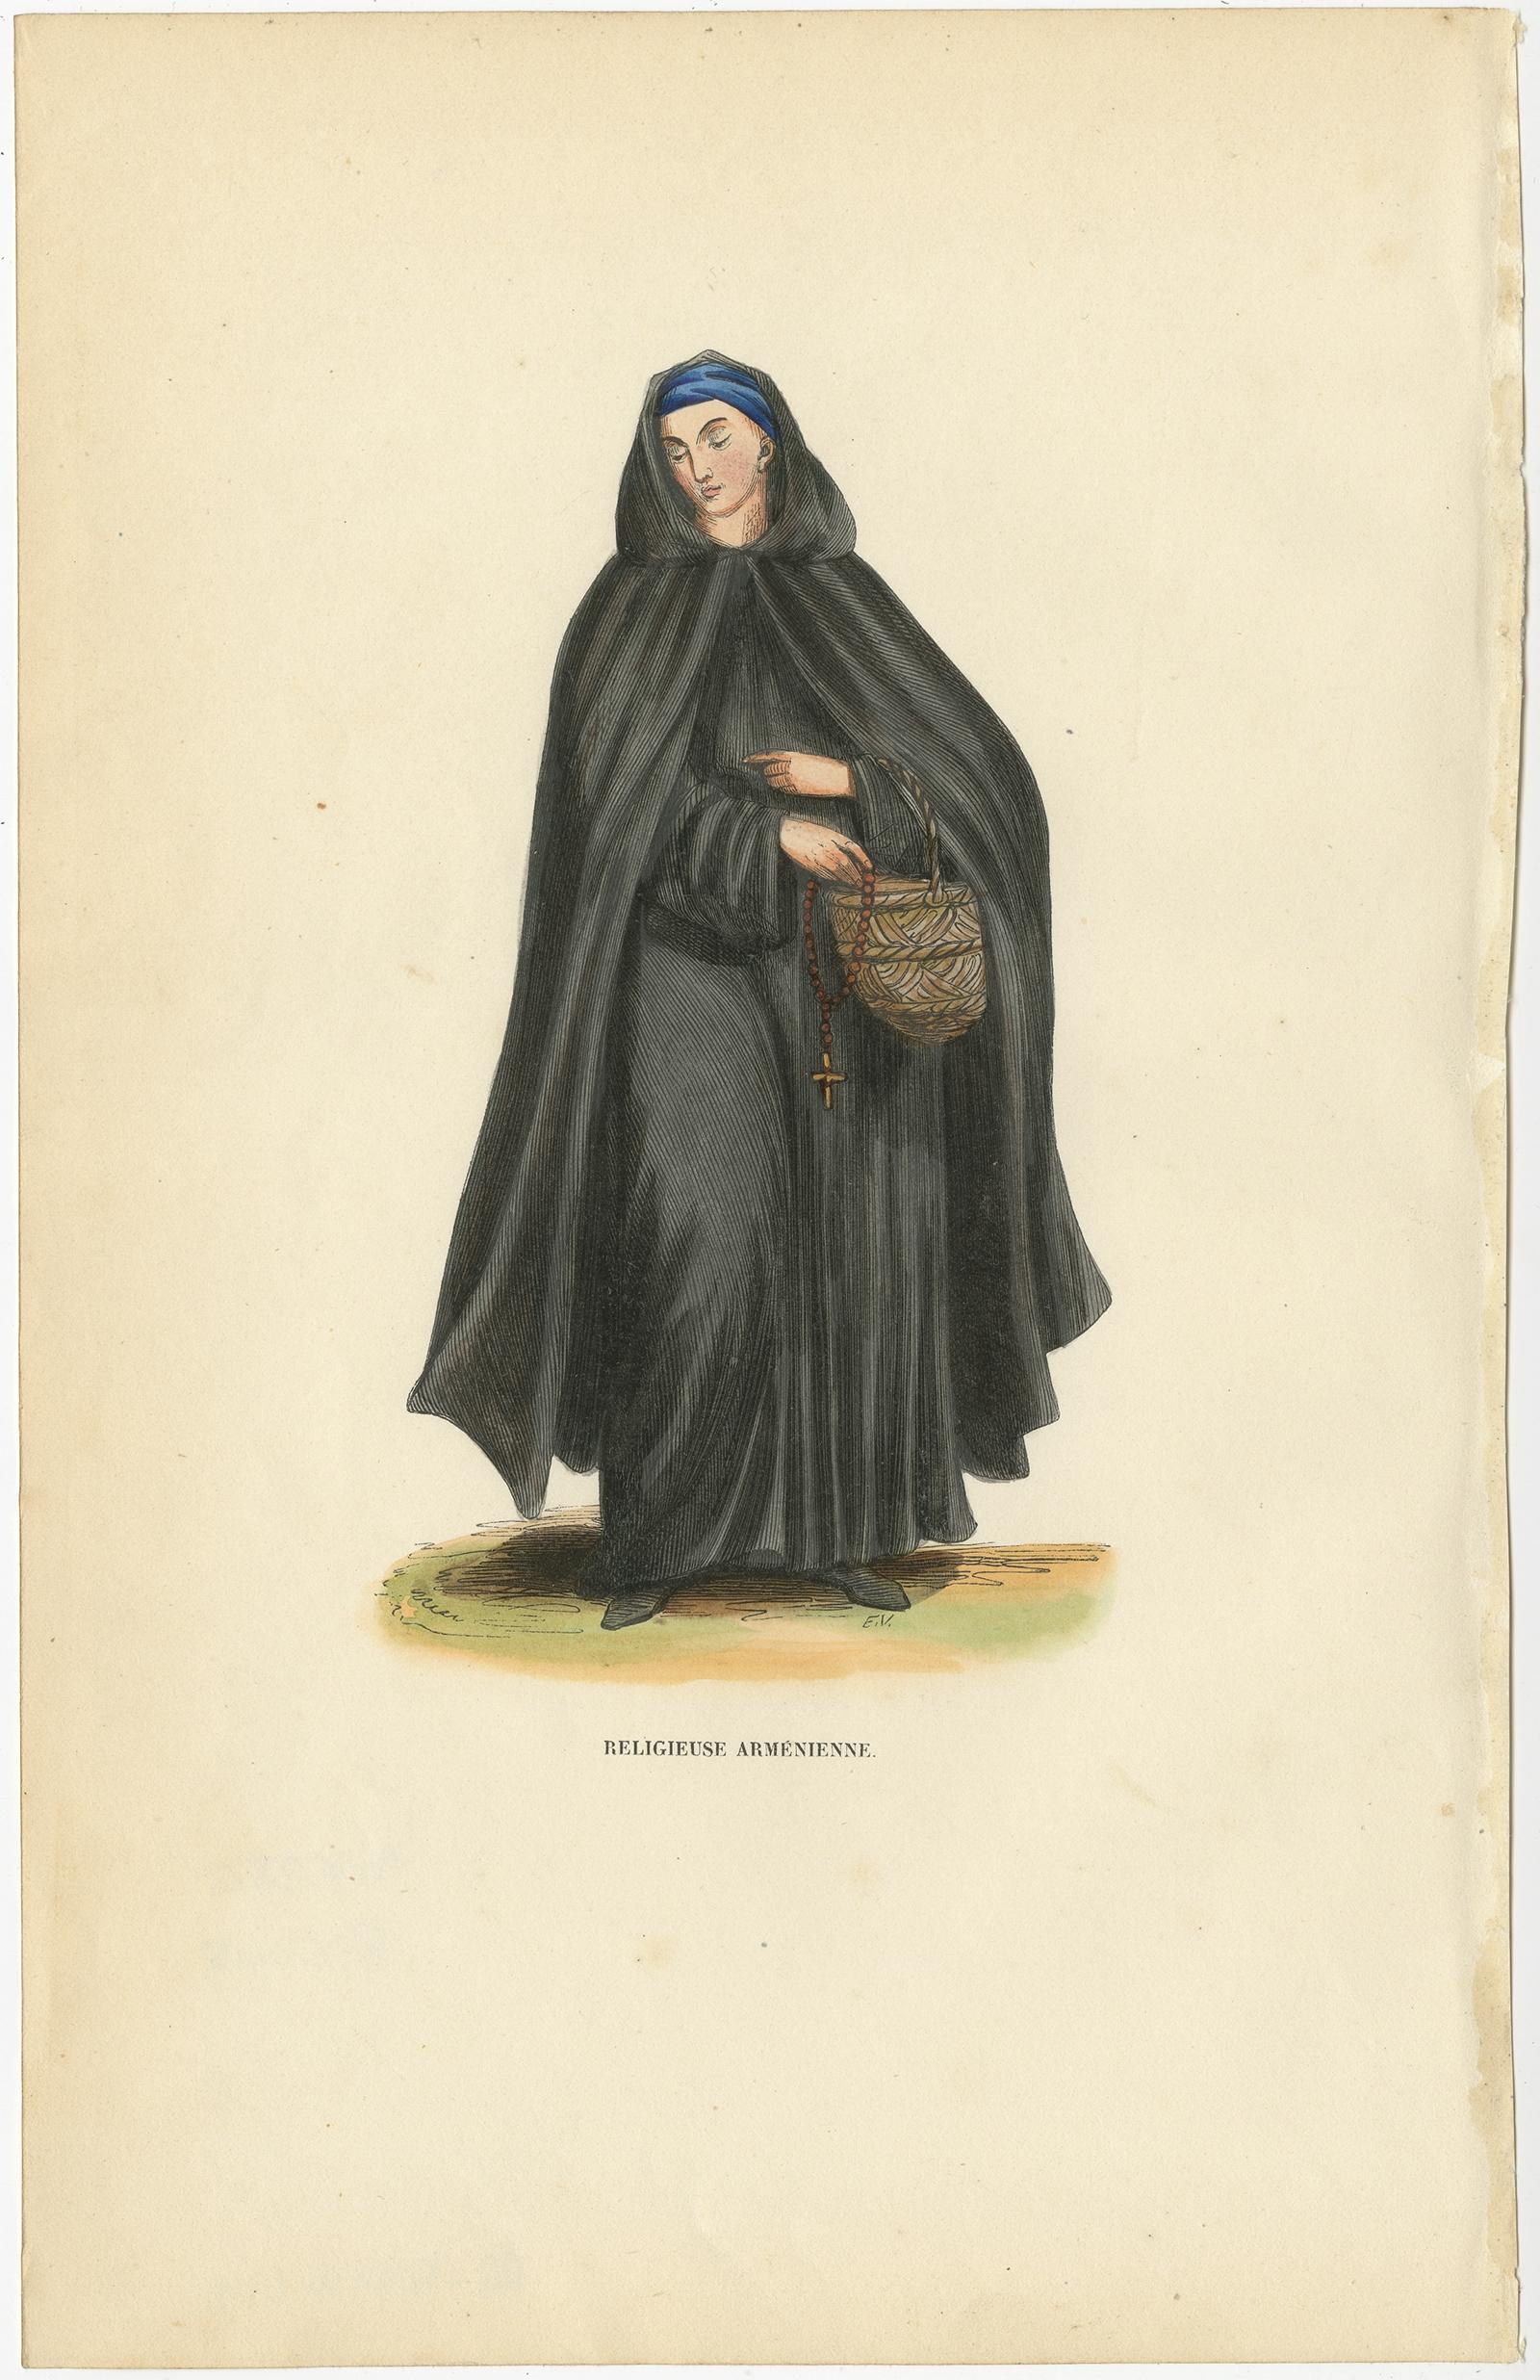 Antique print titled 'Religieuse Arménienne'. 

Print of an Armenian Nun. This print originates from 'Histoire et Costumes des Ordres Religieux'.

Artists and Engravers: Author: Abbé Tiron. 
Condition:
Good, general age-related toning. Minor